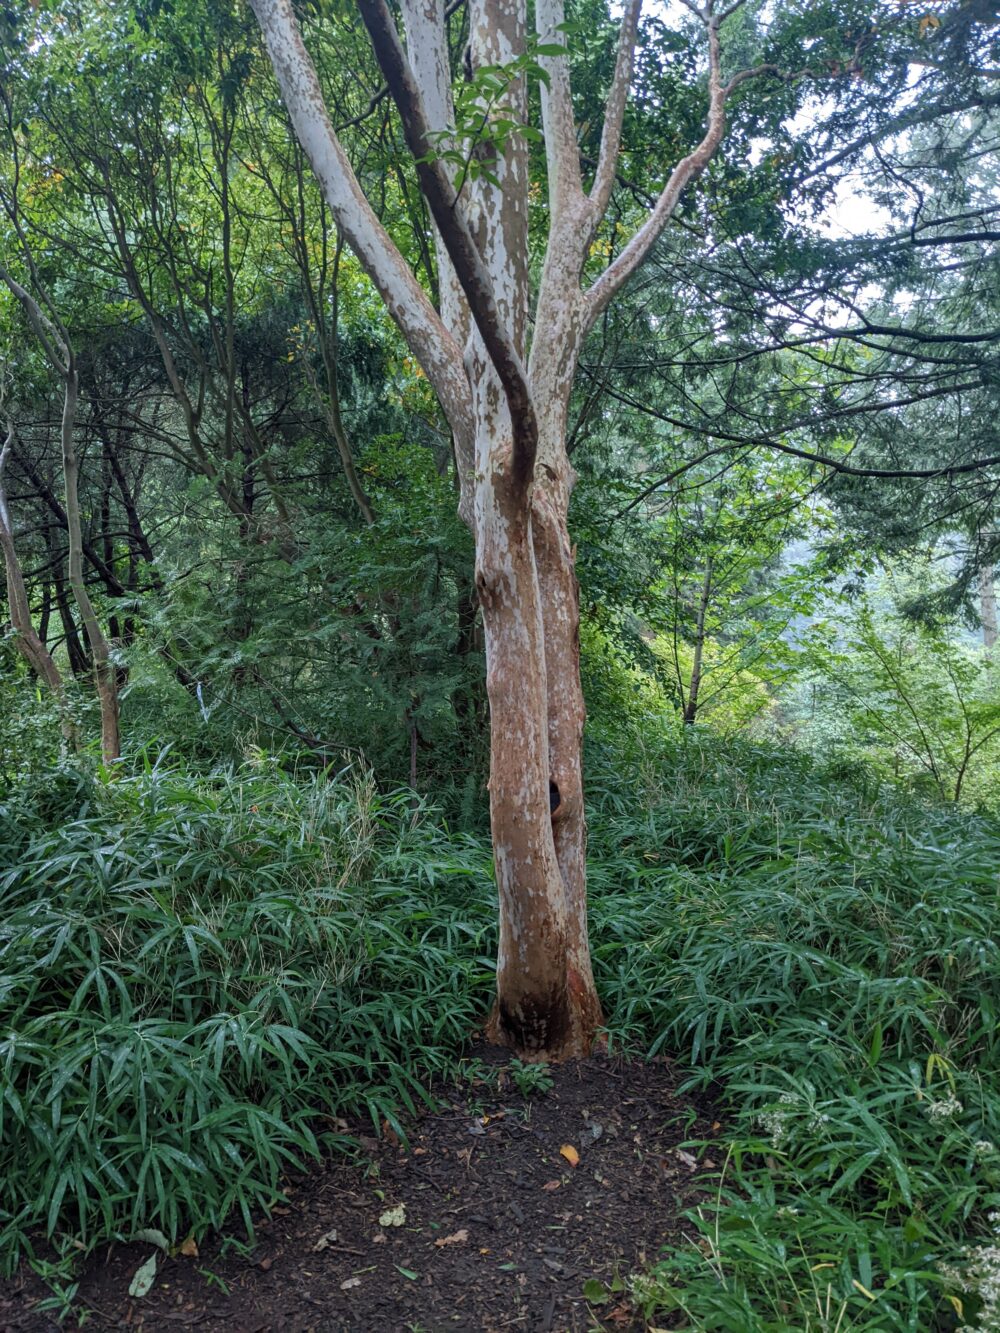 a cool tree i saw at the arboretum, with grass around and a patch of mud in front